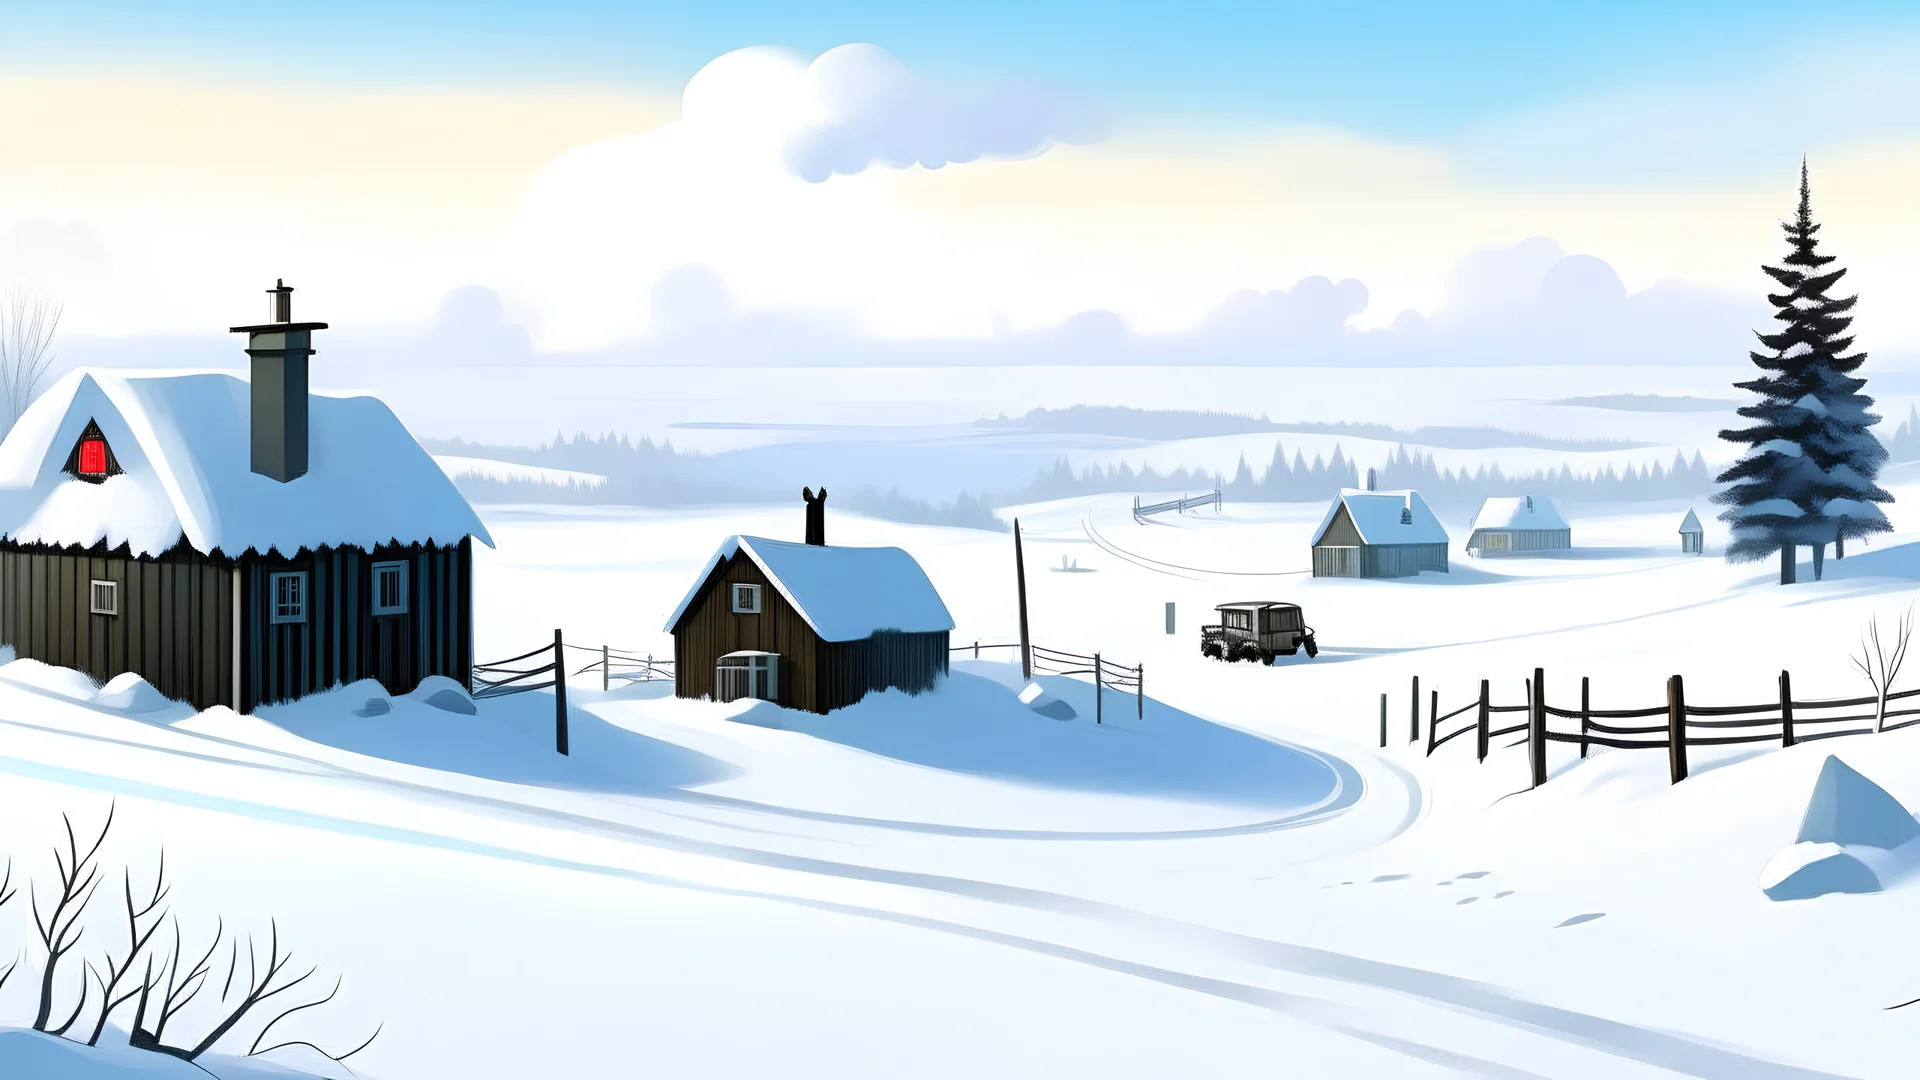 realistic, snow covered landscape. houses totally covered in snow, only chimny's visible, smoke from chimies, old flimsy wieerd hill billy trailer trans farmer, trying to remove the snow